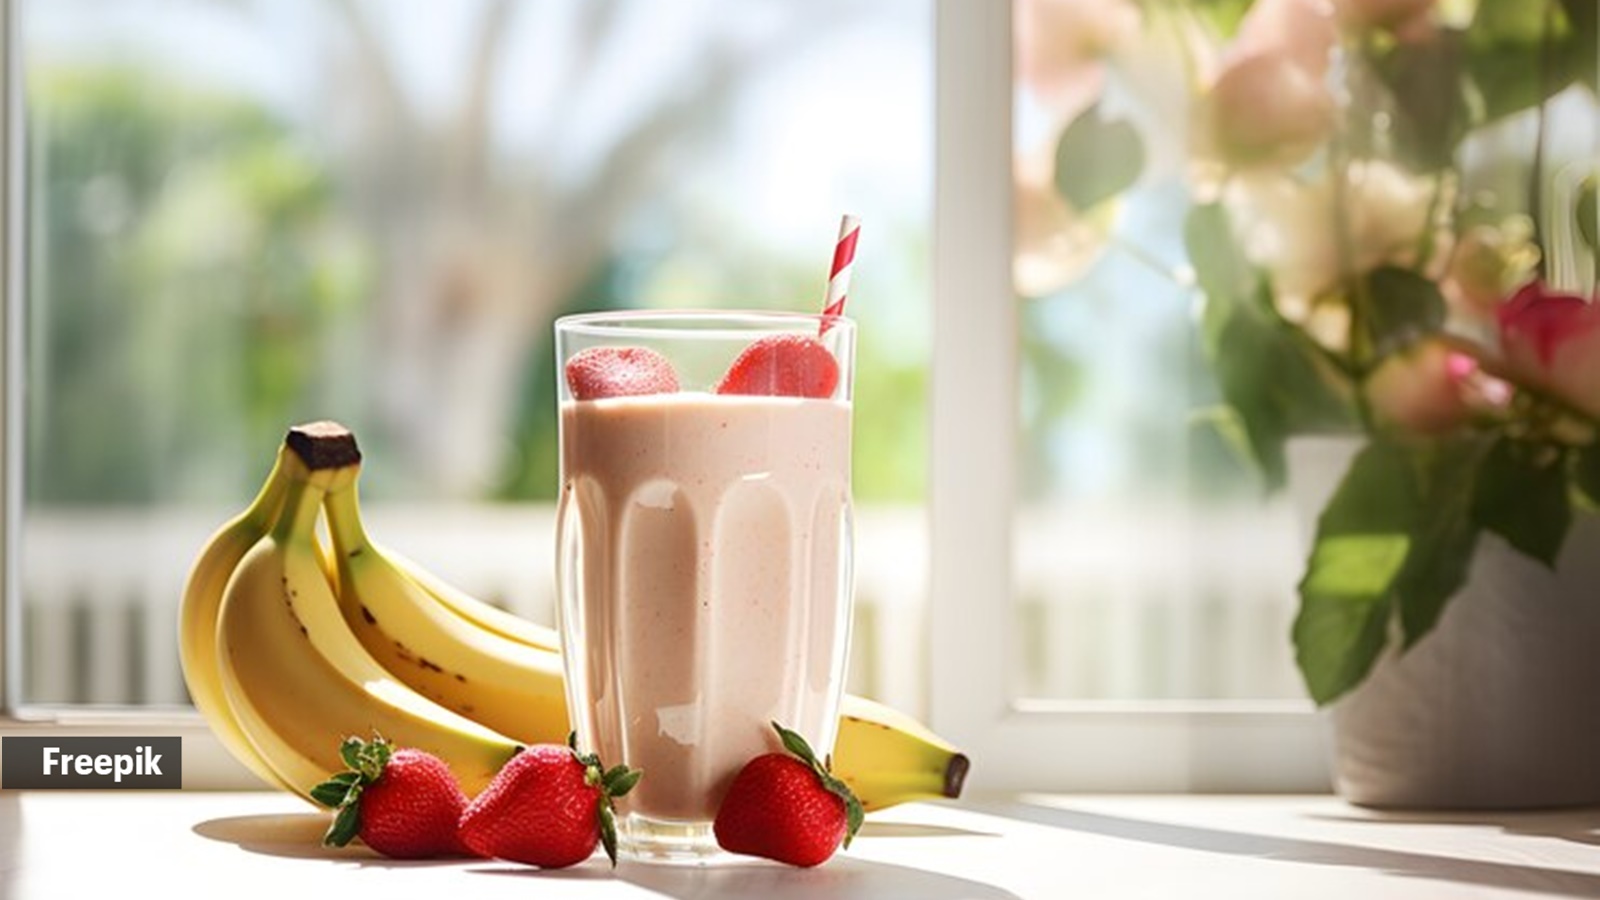 android, adding bananas to your smoothies is (apparently) making them less nutritious